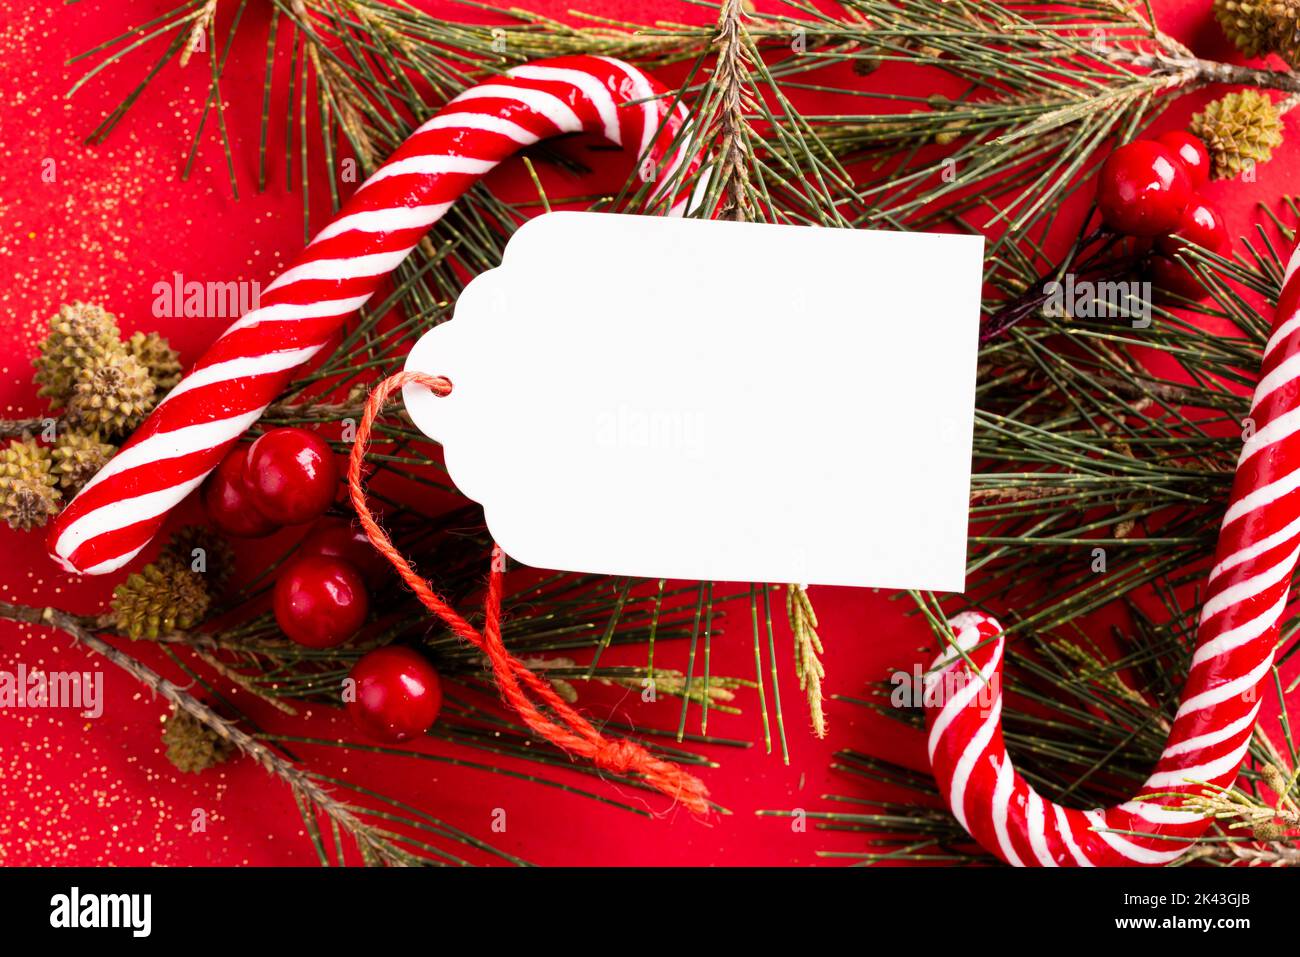 Image of christmas decoration with gif tag and copy space on red background Stock Photo